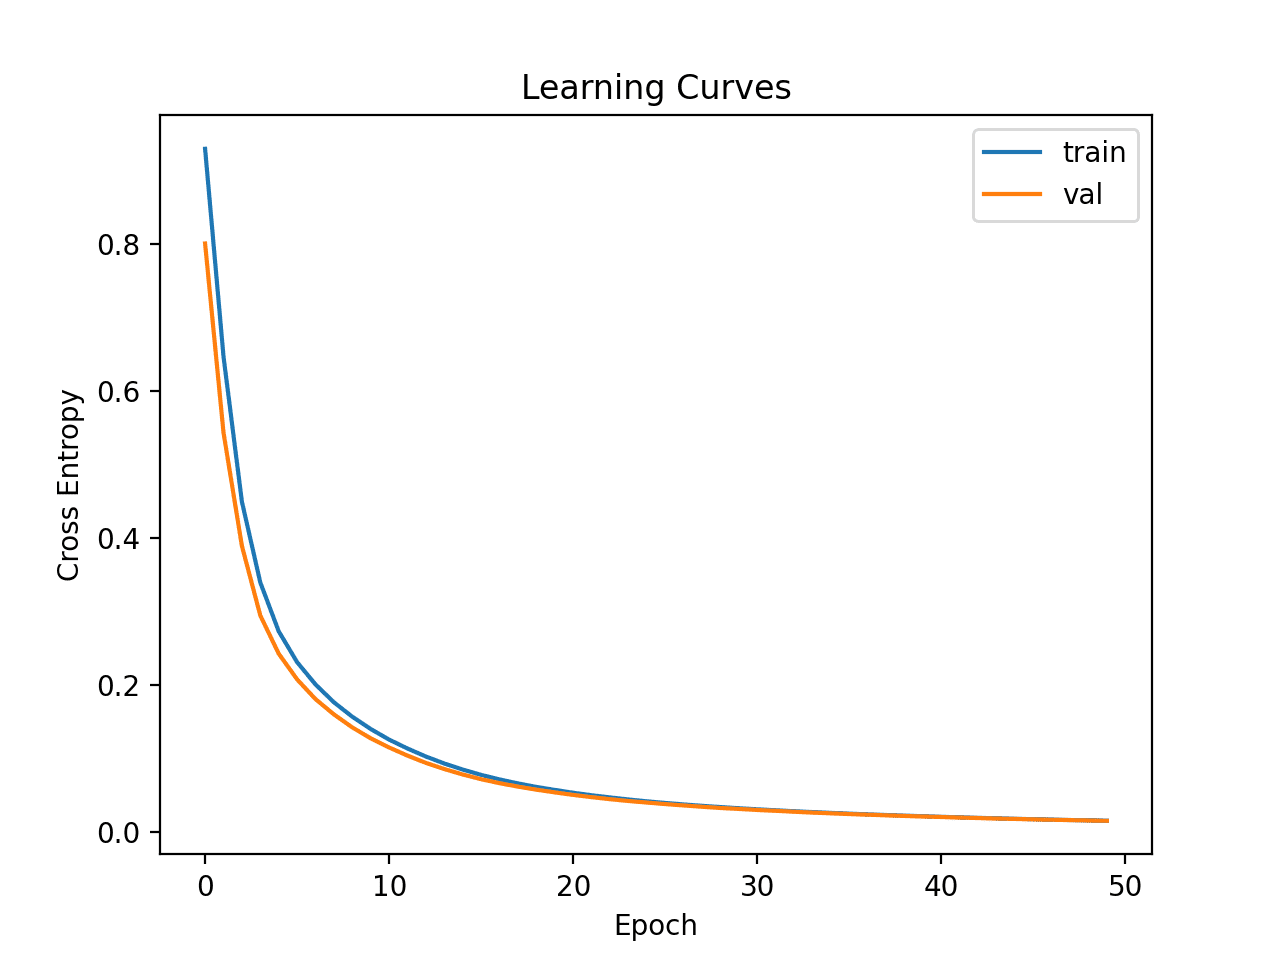 Learning Curves of Simple Multilayer Perceptron on Skins Dataset